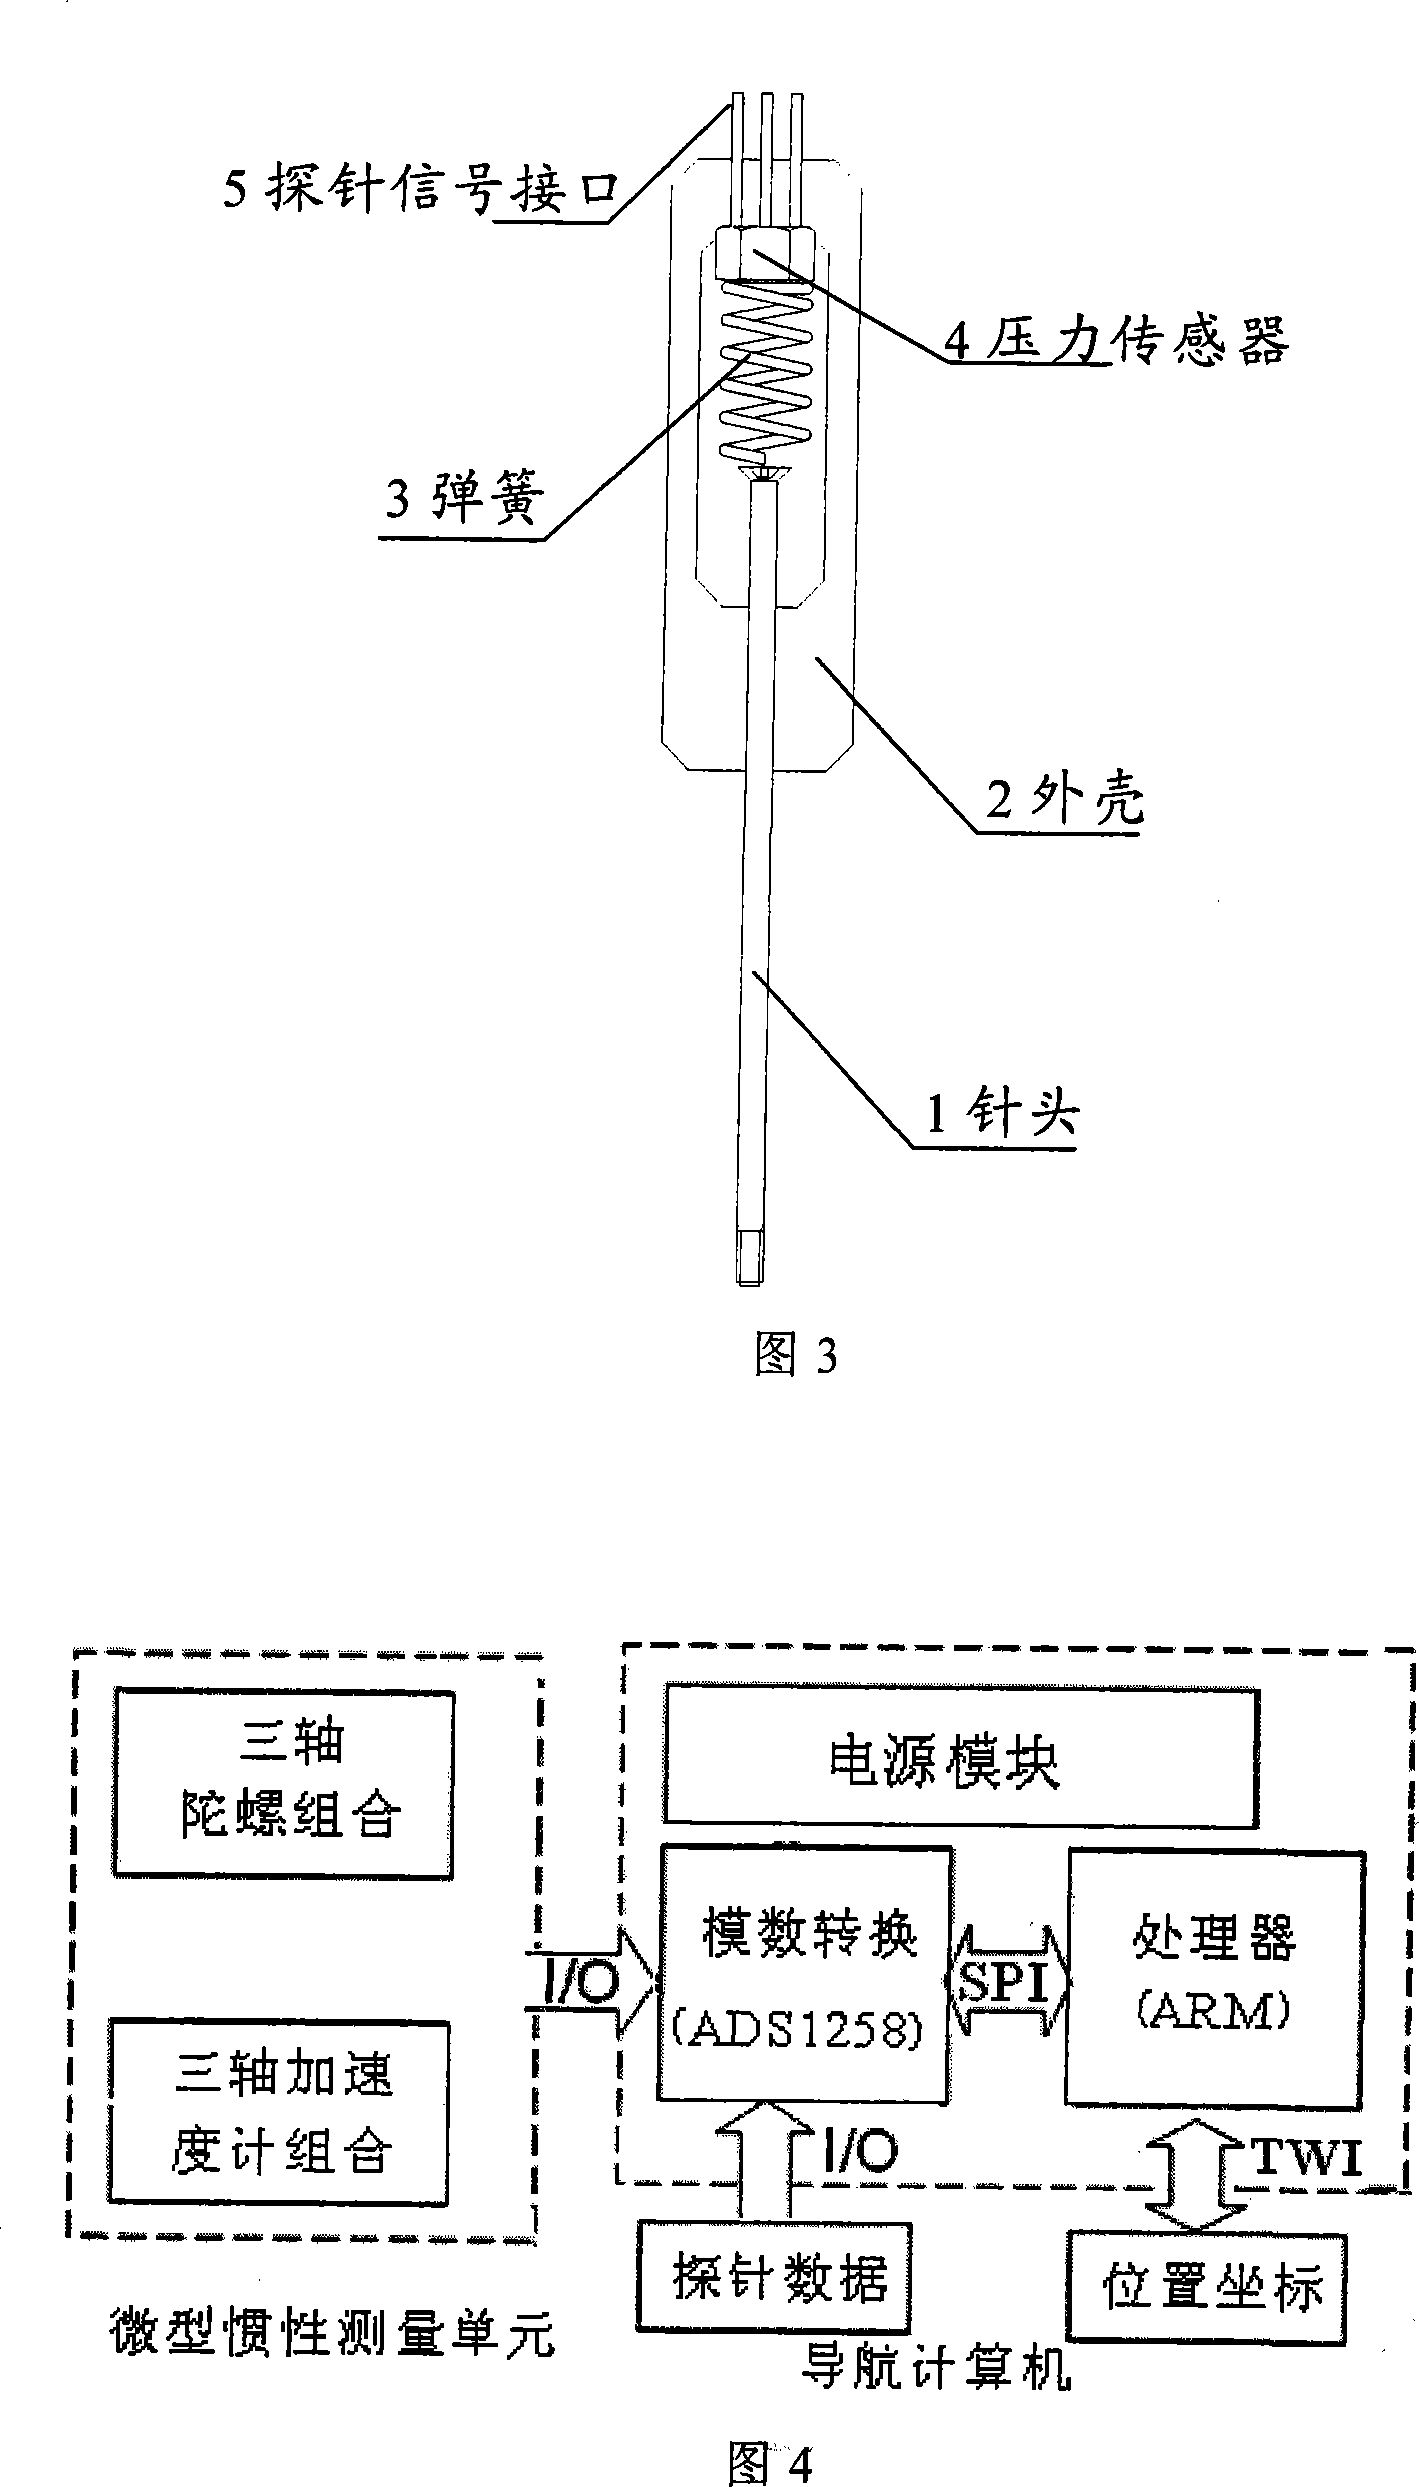 Device for measuring entity appearance by micro-inertial navigation